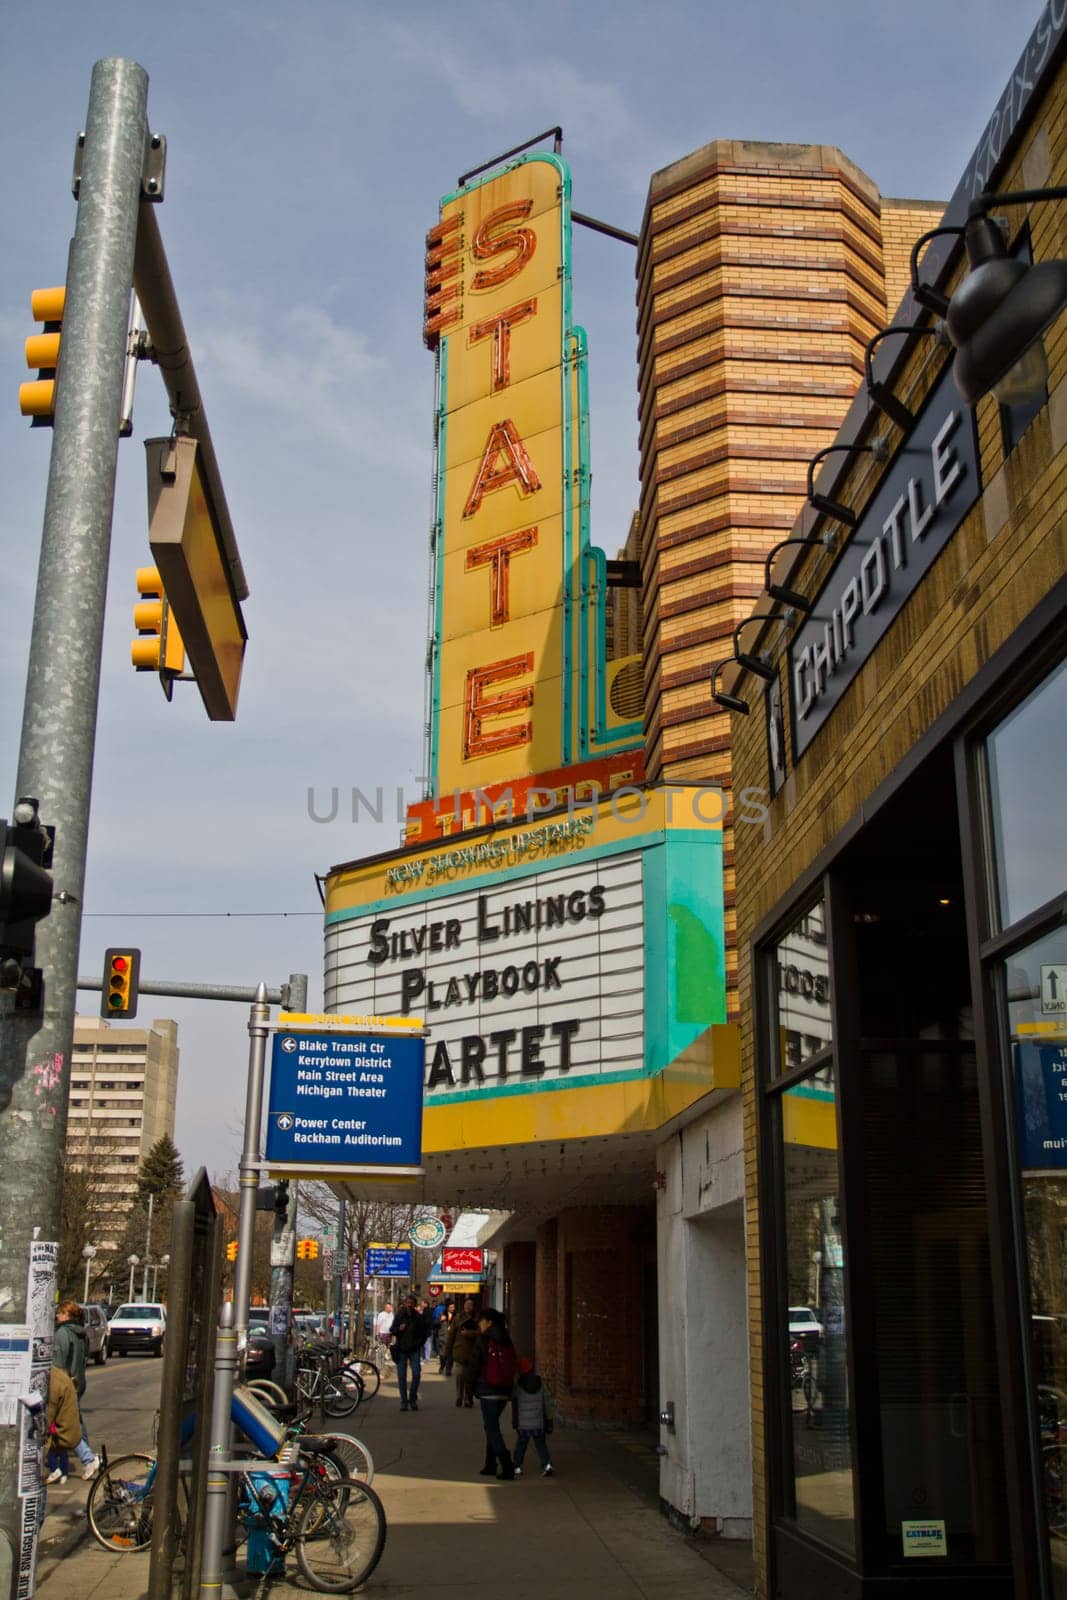 Experience the vibrant blend of history and modernity in downtown Ann Arbor, MI. The iconic 'STATE' theater marquee shines bright, promoting 'Silver Linings Playbook,' while Chipotle stands as a symbol of contemporary dining.